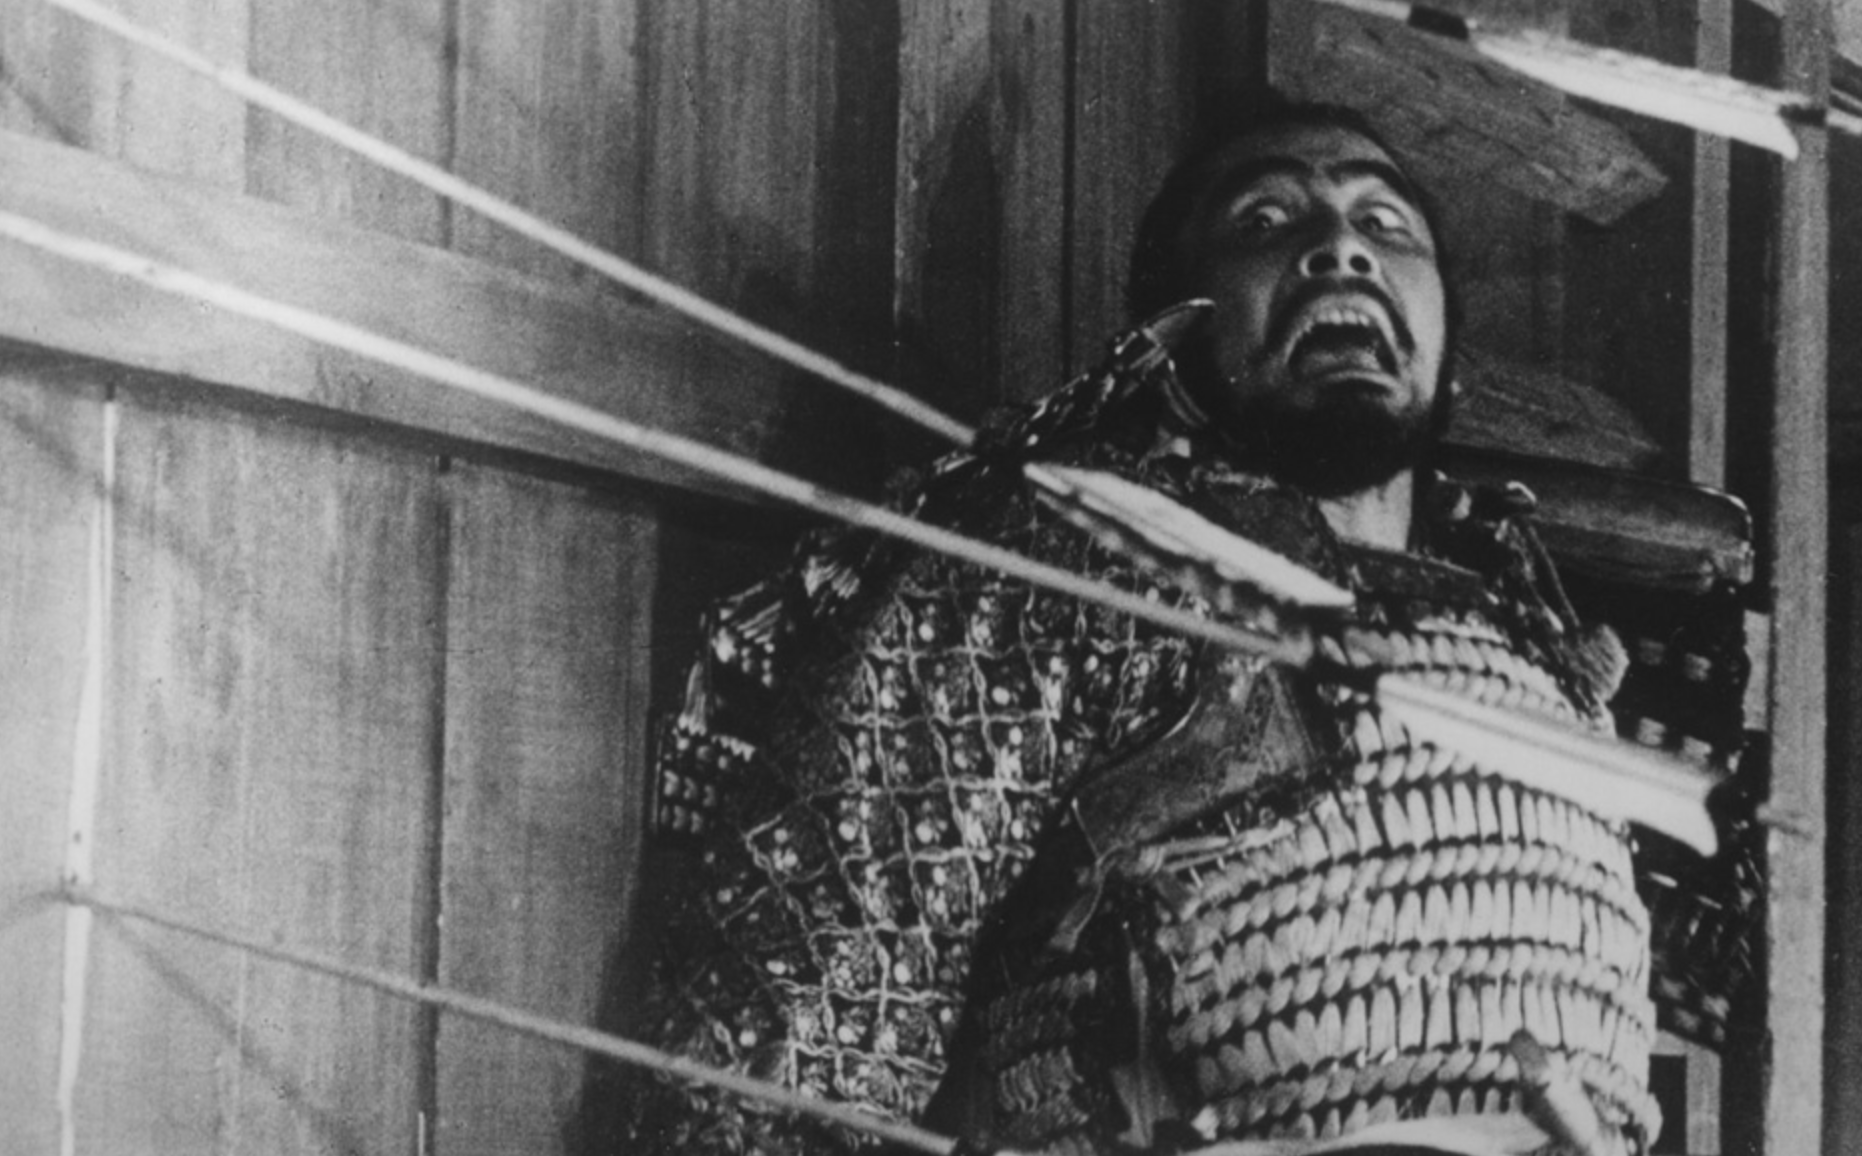 “In Akira Kurasawa's 1961 film "Throne of Blood", real arches shot arrows into the wall as the actor ran past.”